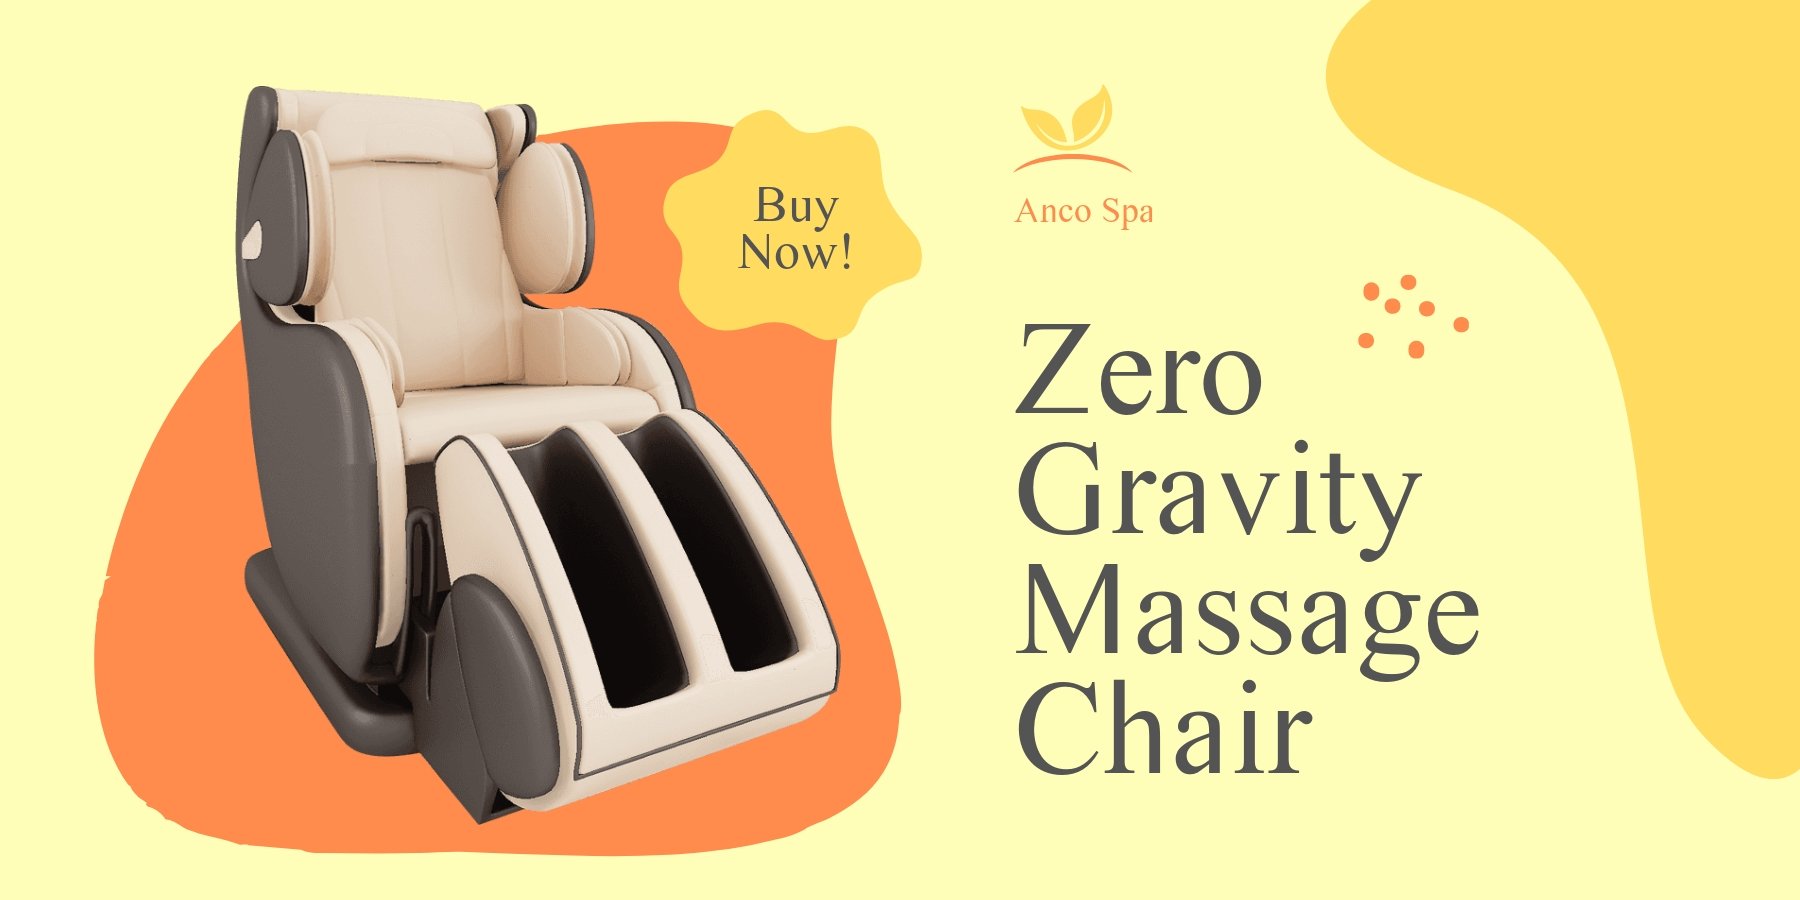 Massage Chair Promotion Banner Template